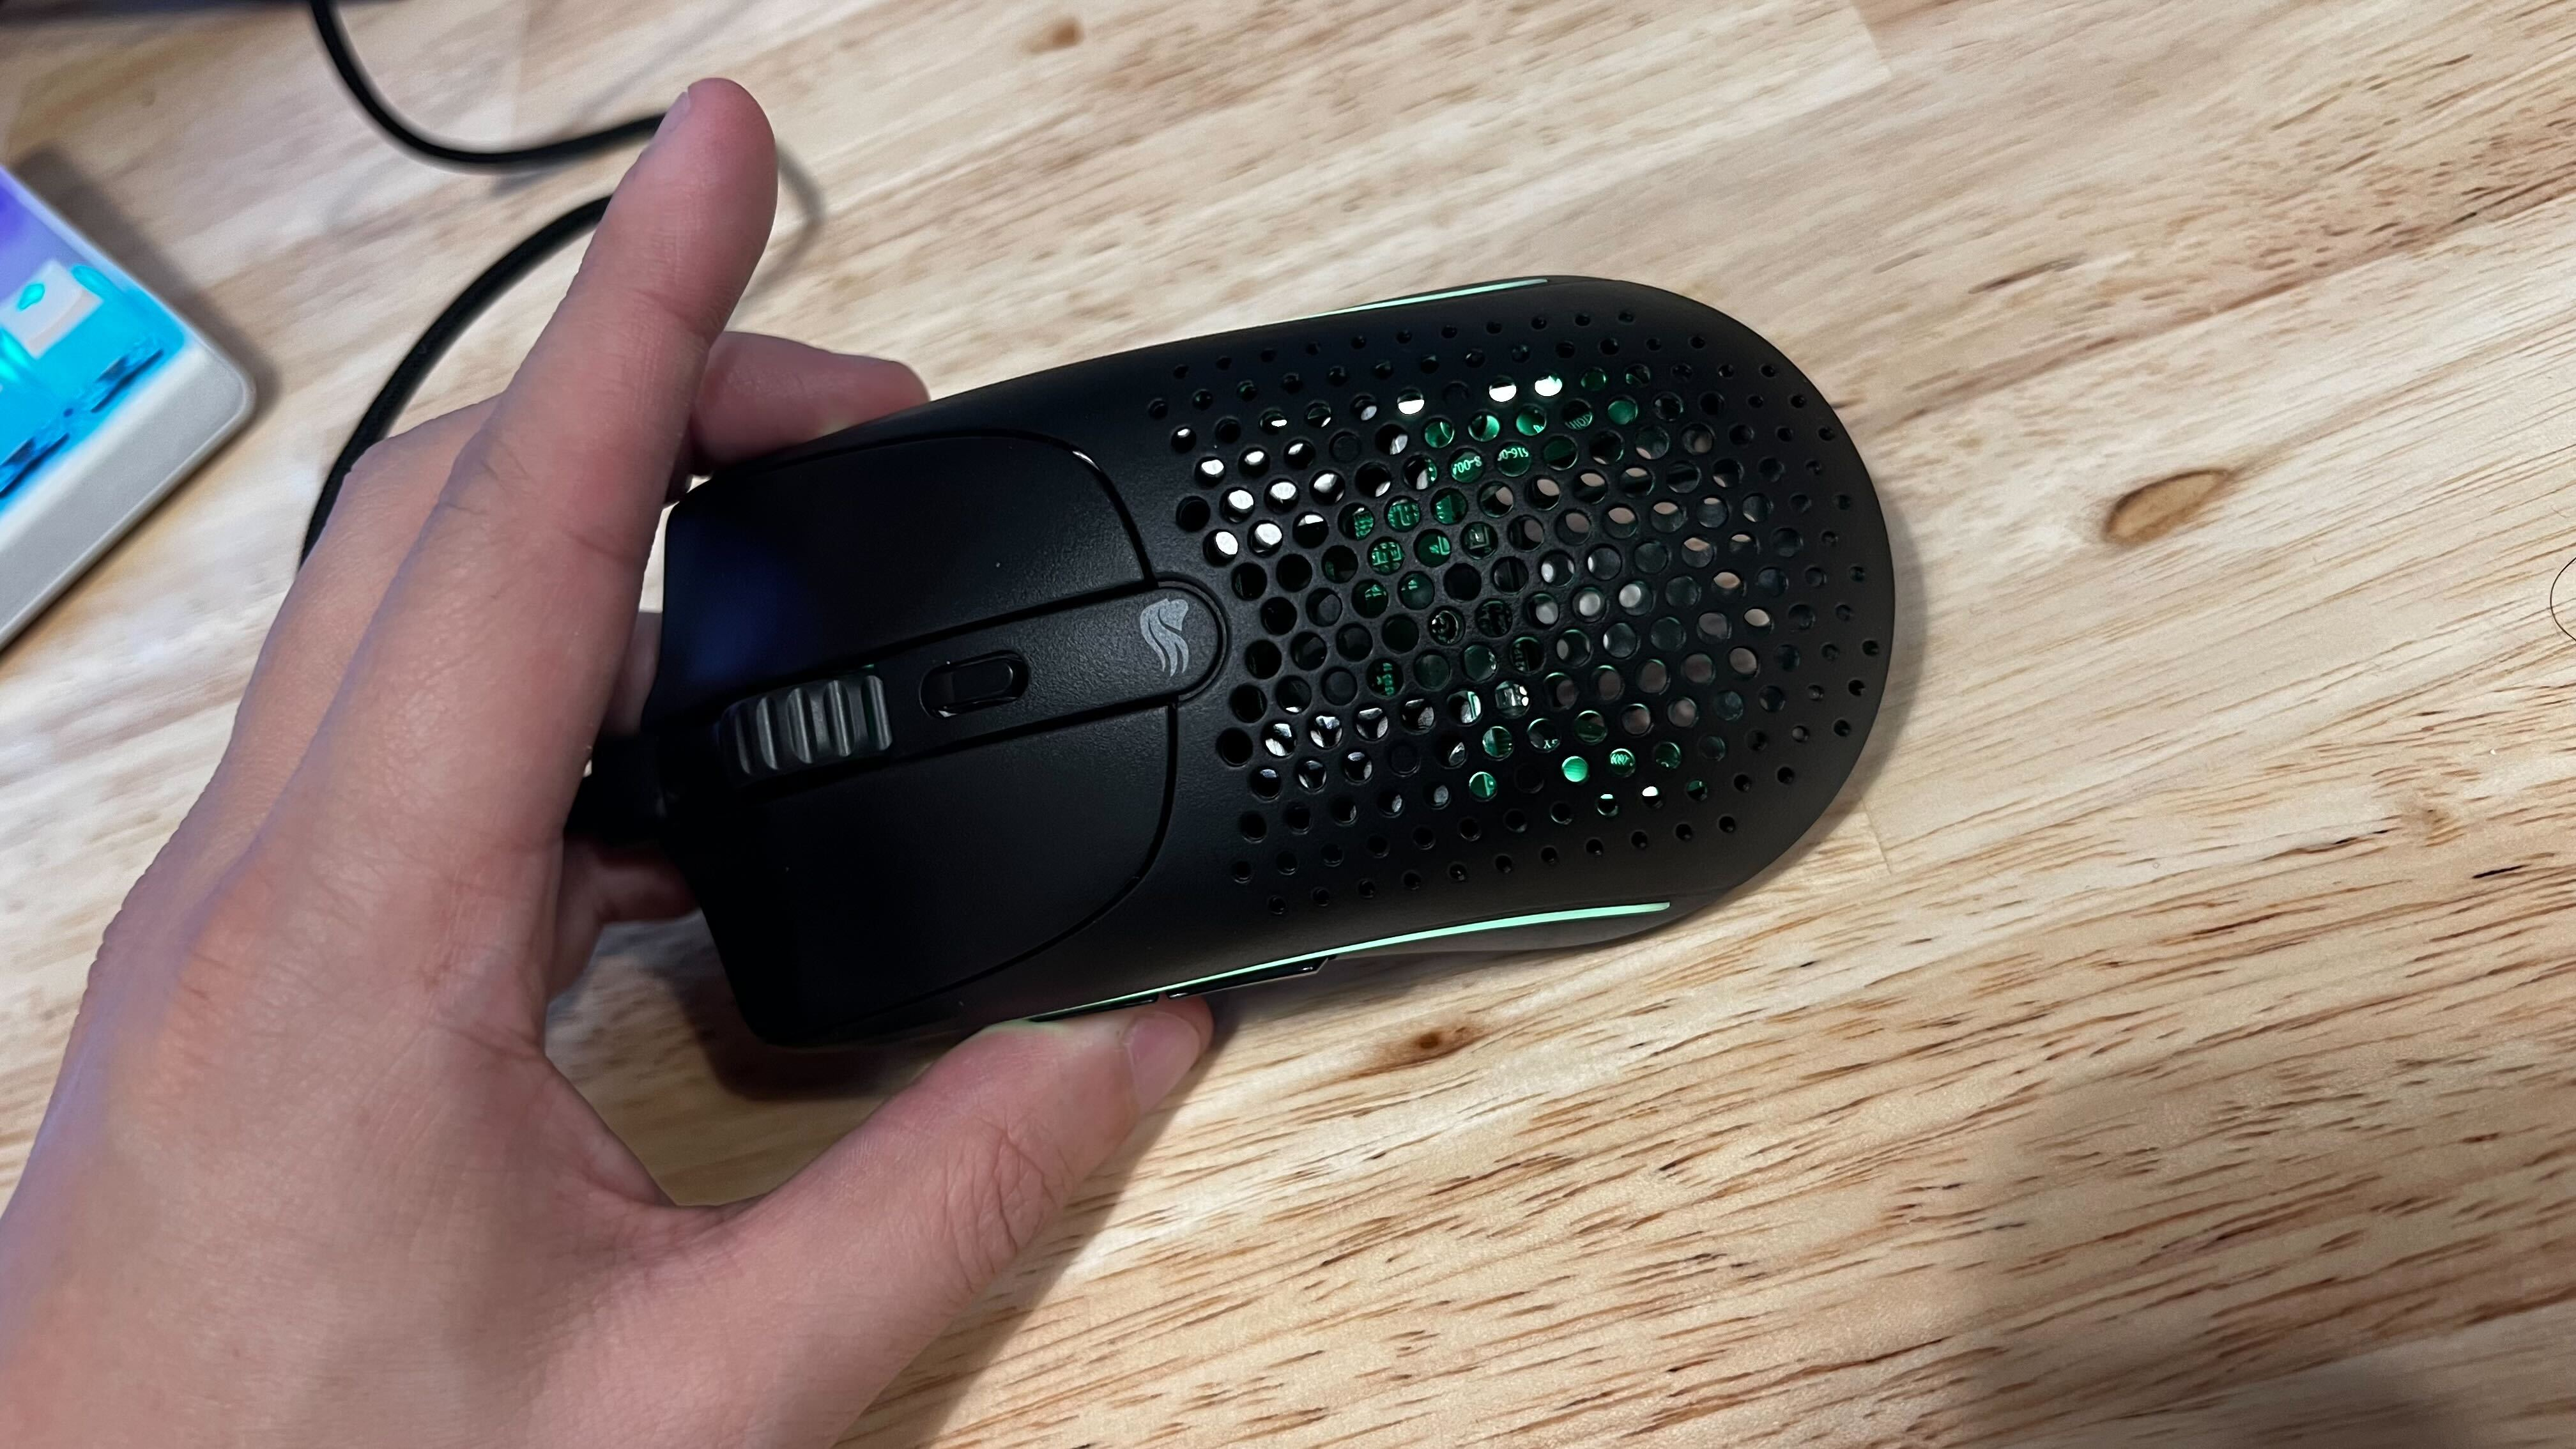 Glorious Model O2 wireless mouse in my hand.